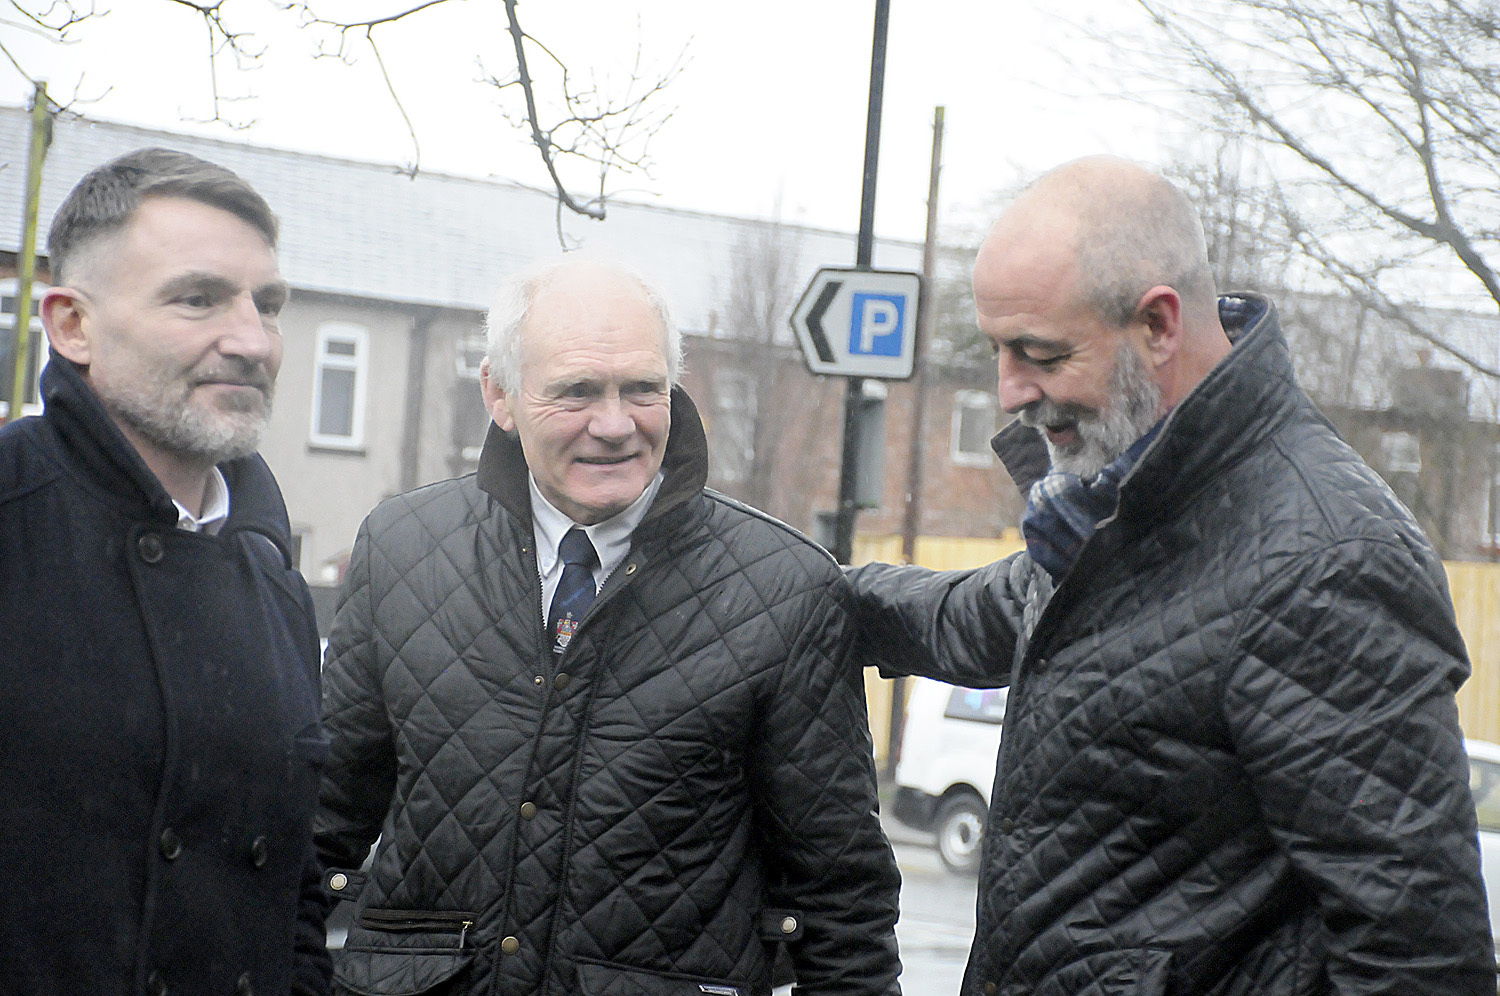 Paul Cullen, Clive Griffiths and Joe Lydon at Des Drummonds funeral (Image: Mike Boden)